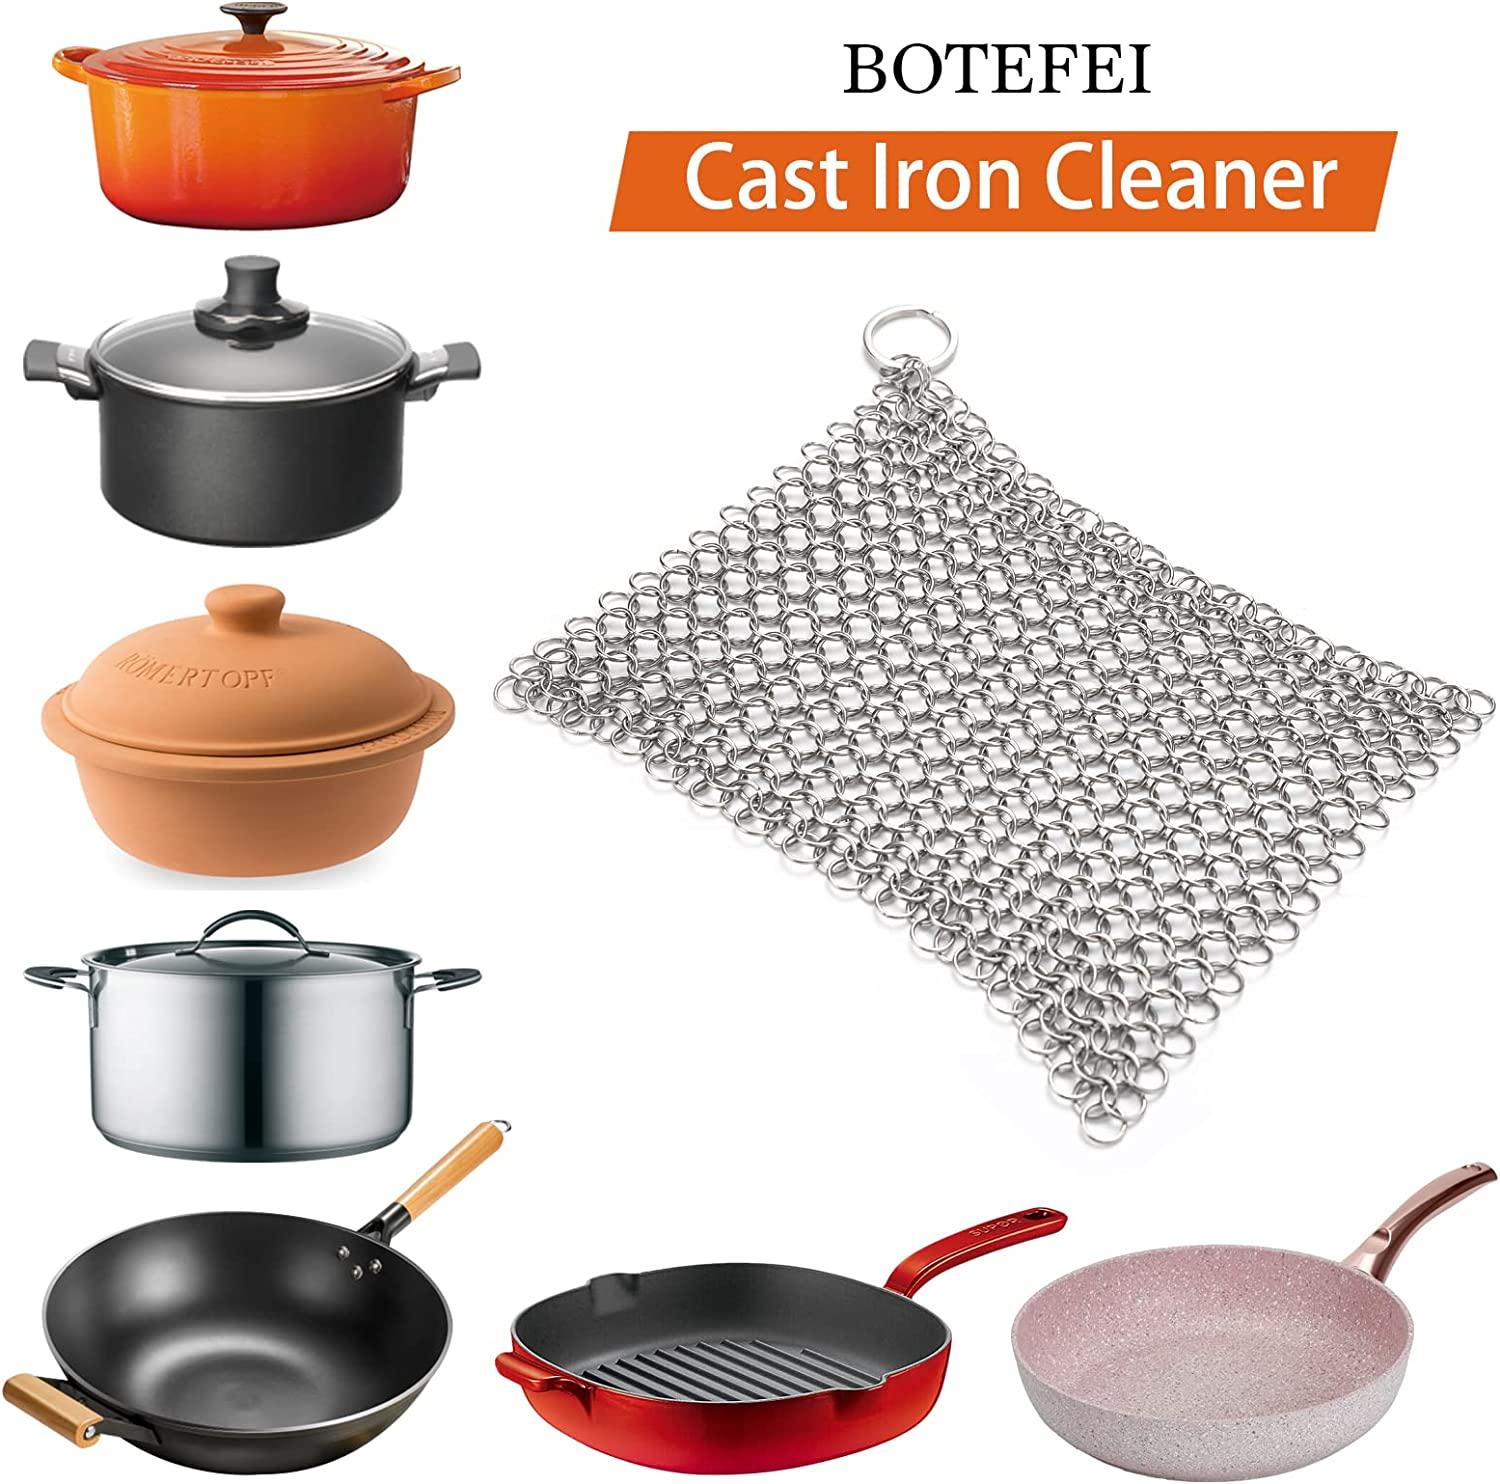 BOTEFEI Cast Iron Cleaner 6 x 6.3 Premium 316L Stainless Steel Chainmail  Scrubber for Skillet, Wok